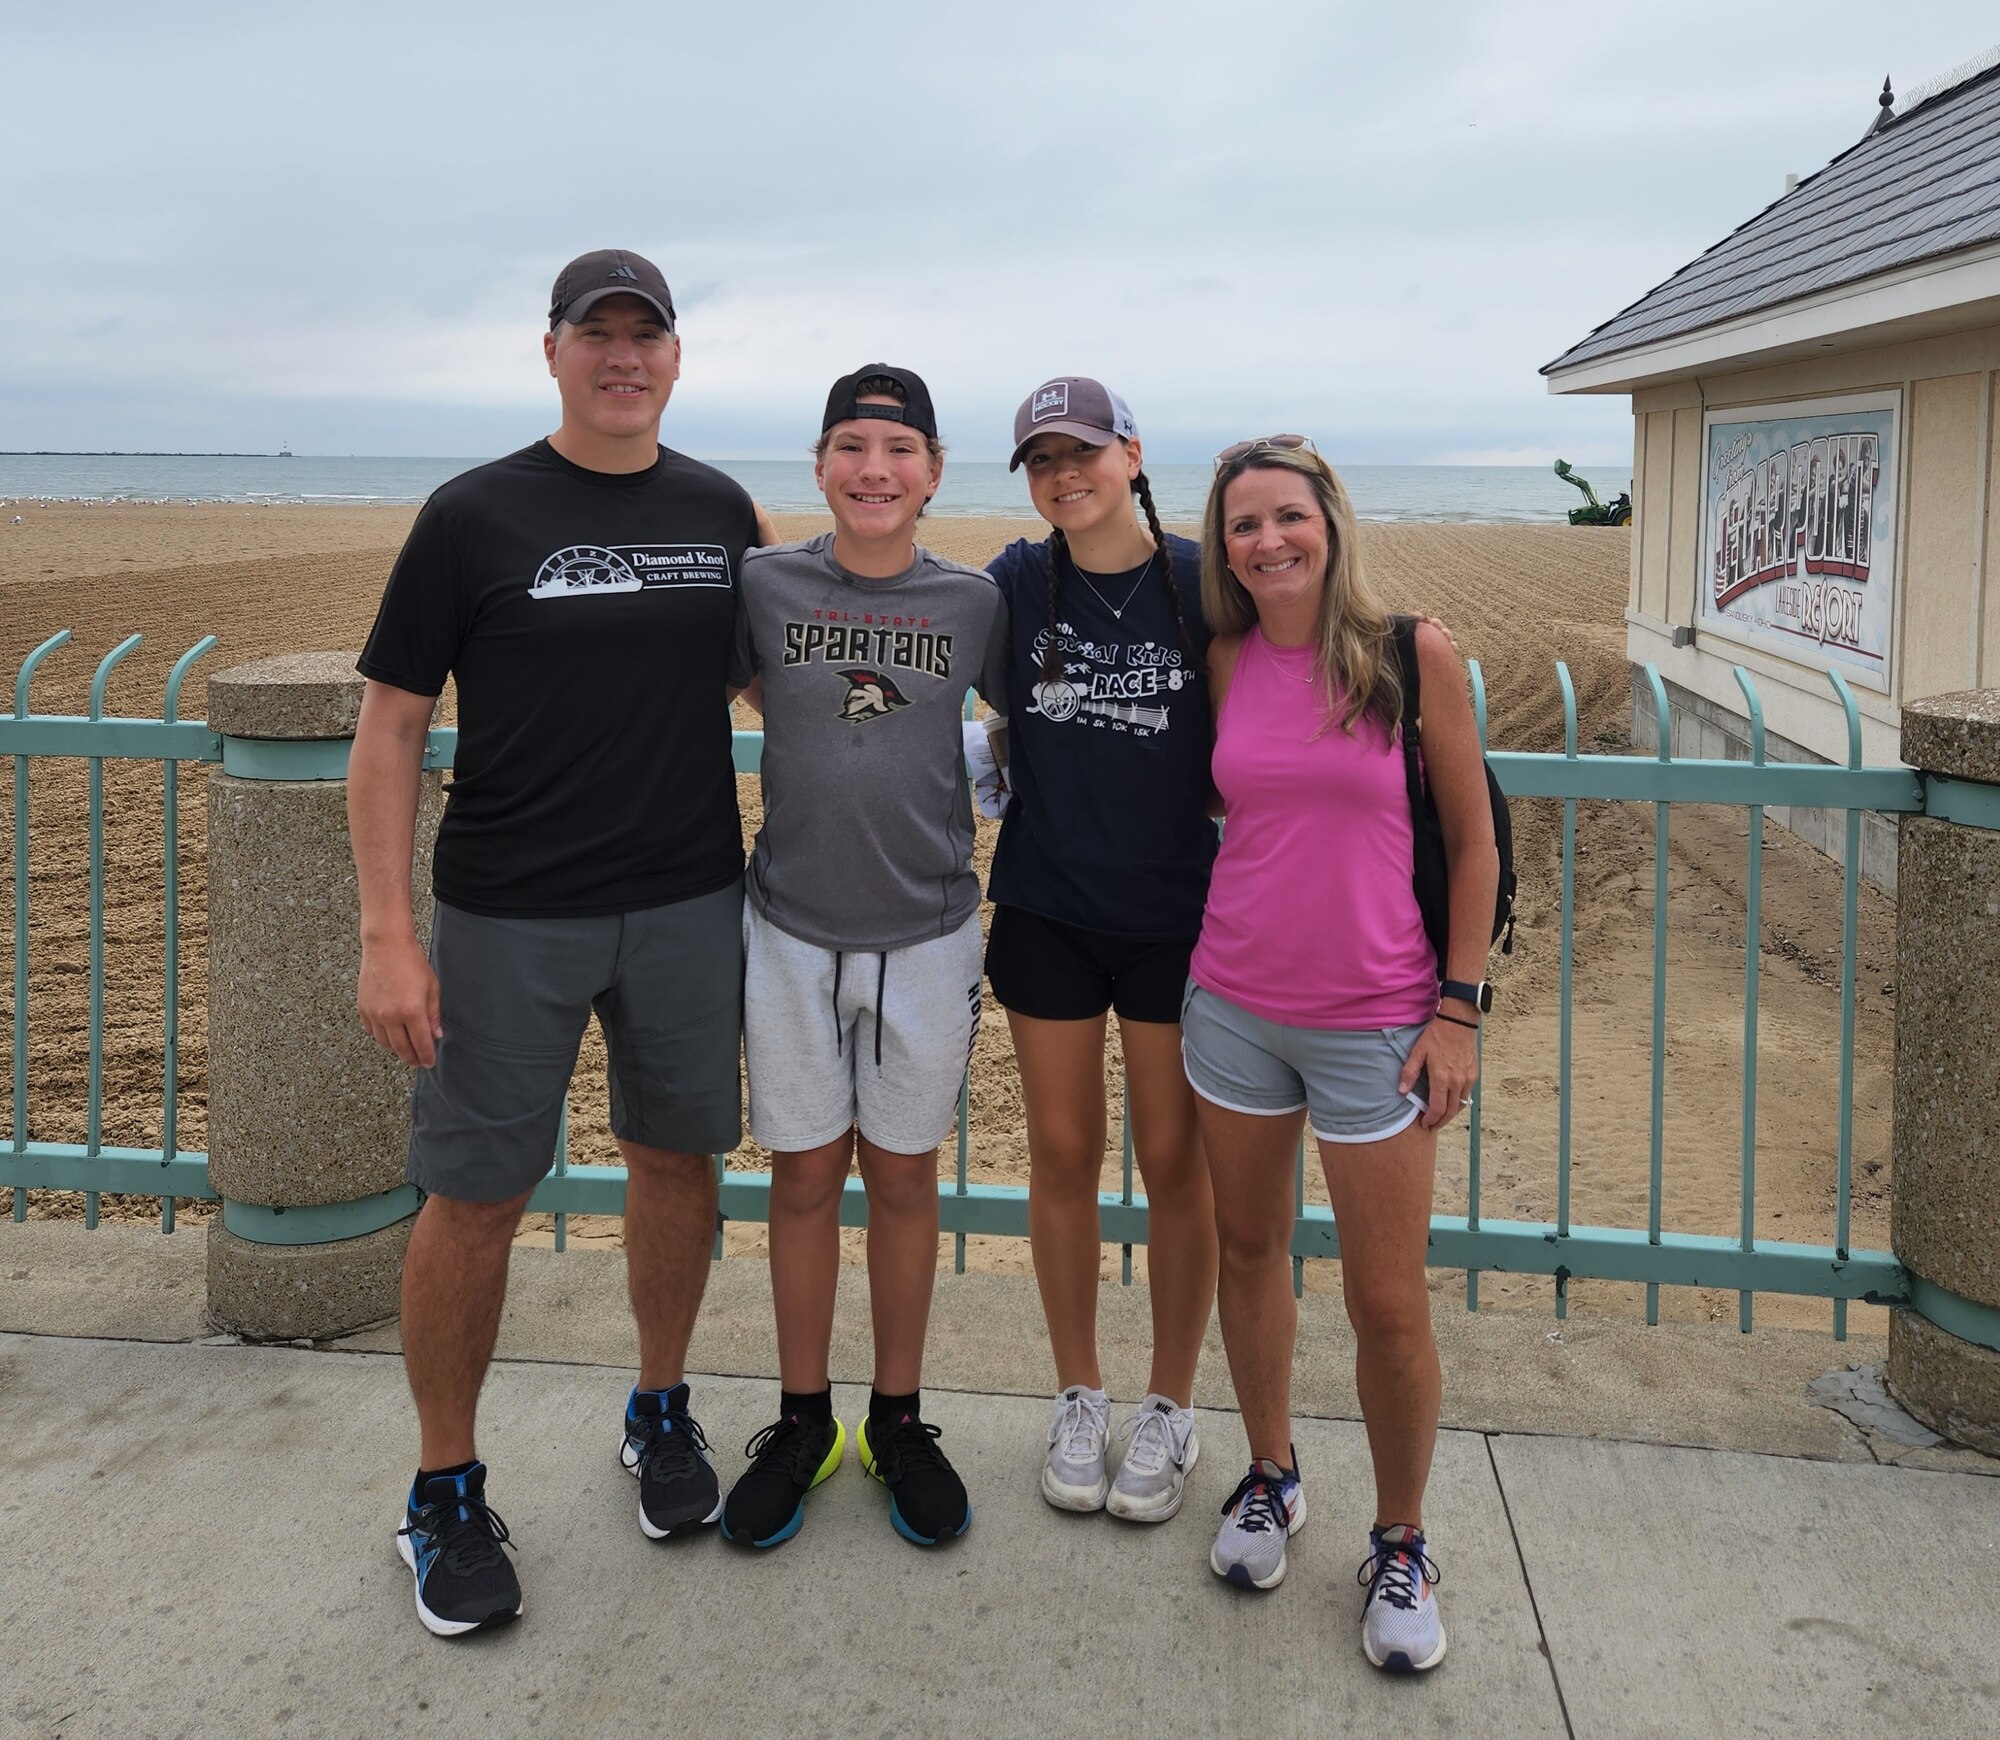 The Sandness family at Cedar Point in Sandusky, Ohio. (From left) Col. Pete Sandness, Tyler, Maren, and Col. Polly Sandness. (Courtesy photo).